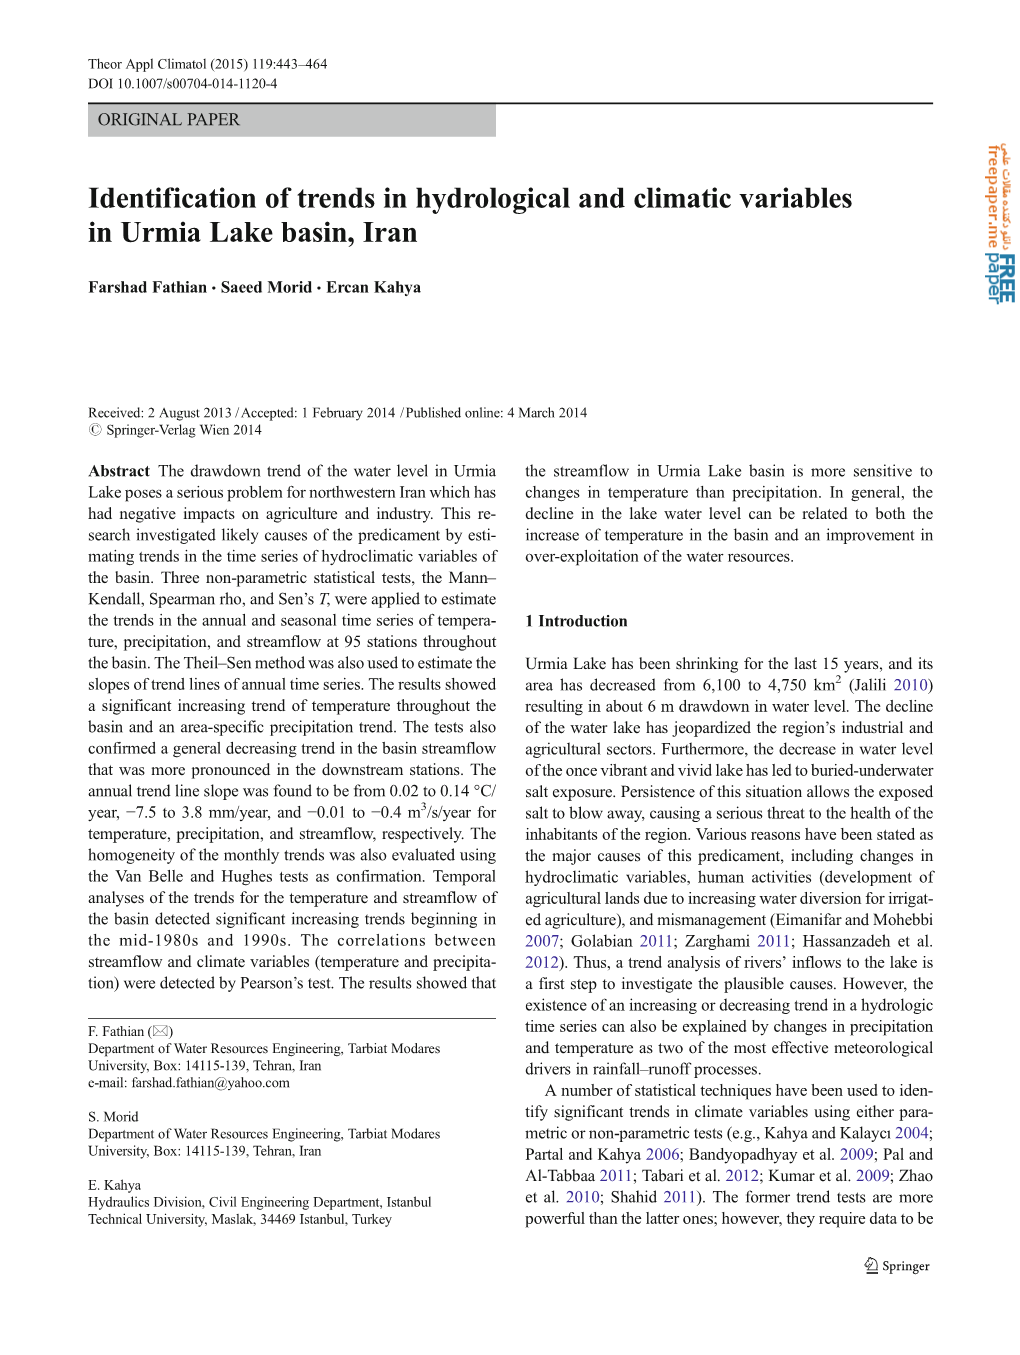 Identification of Trends in Hydrological and Climatic Variables in Urmia Lake Basin, Iran